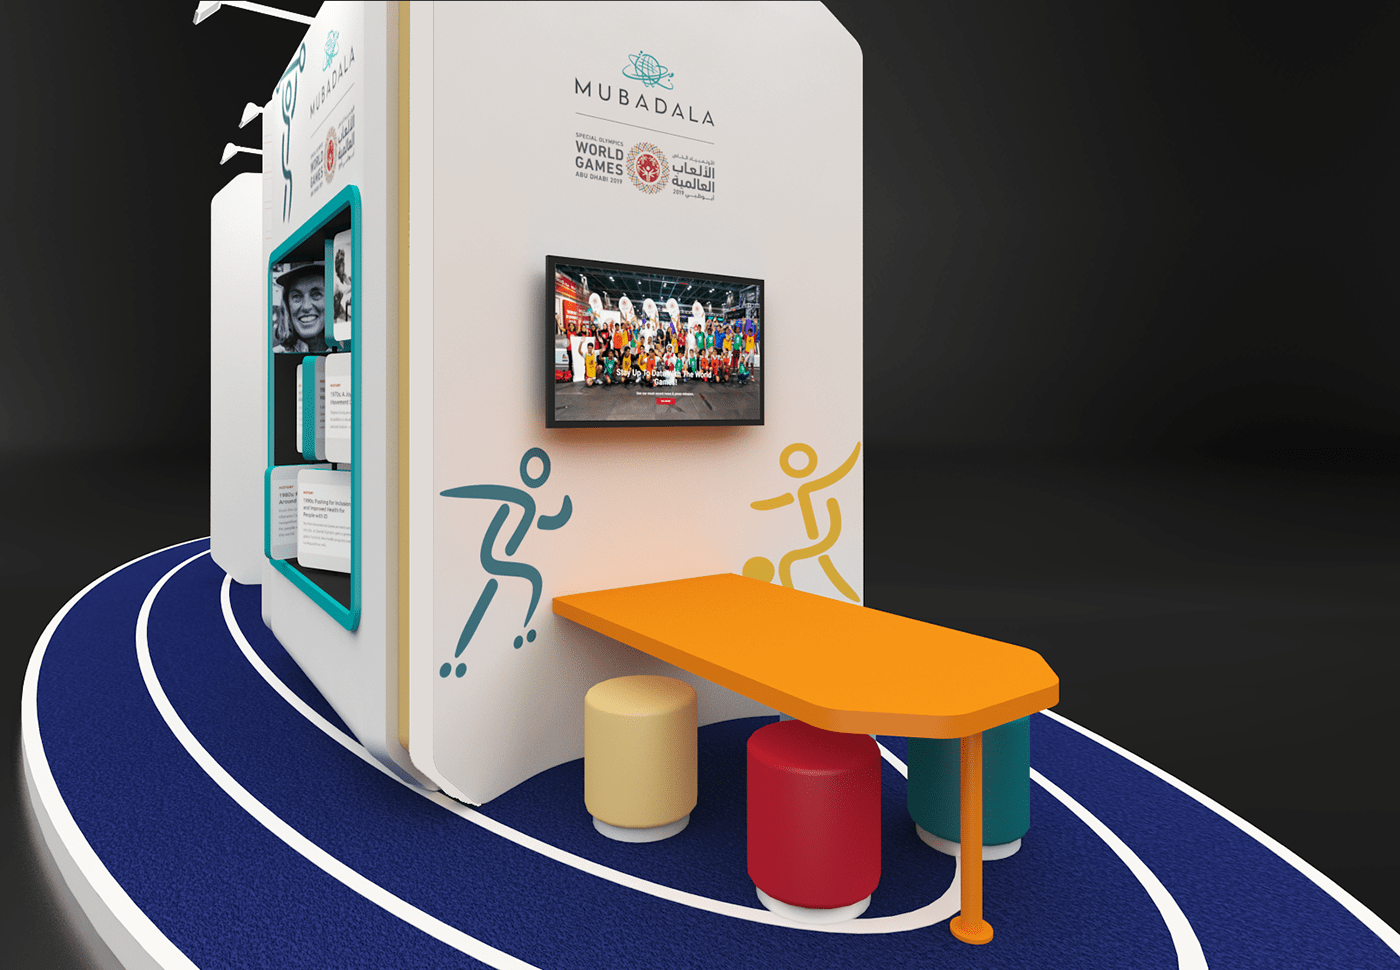 special olympics Abu Dhabi mubadala exhibition stand stand design booth design activation Games Brand activation